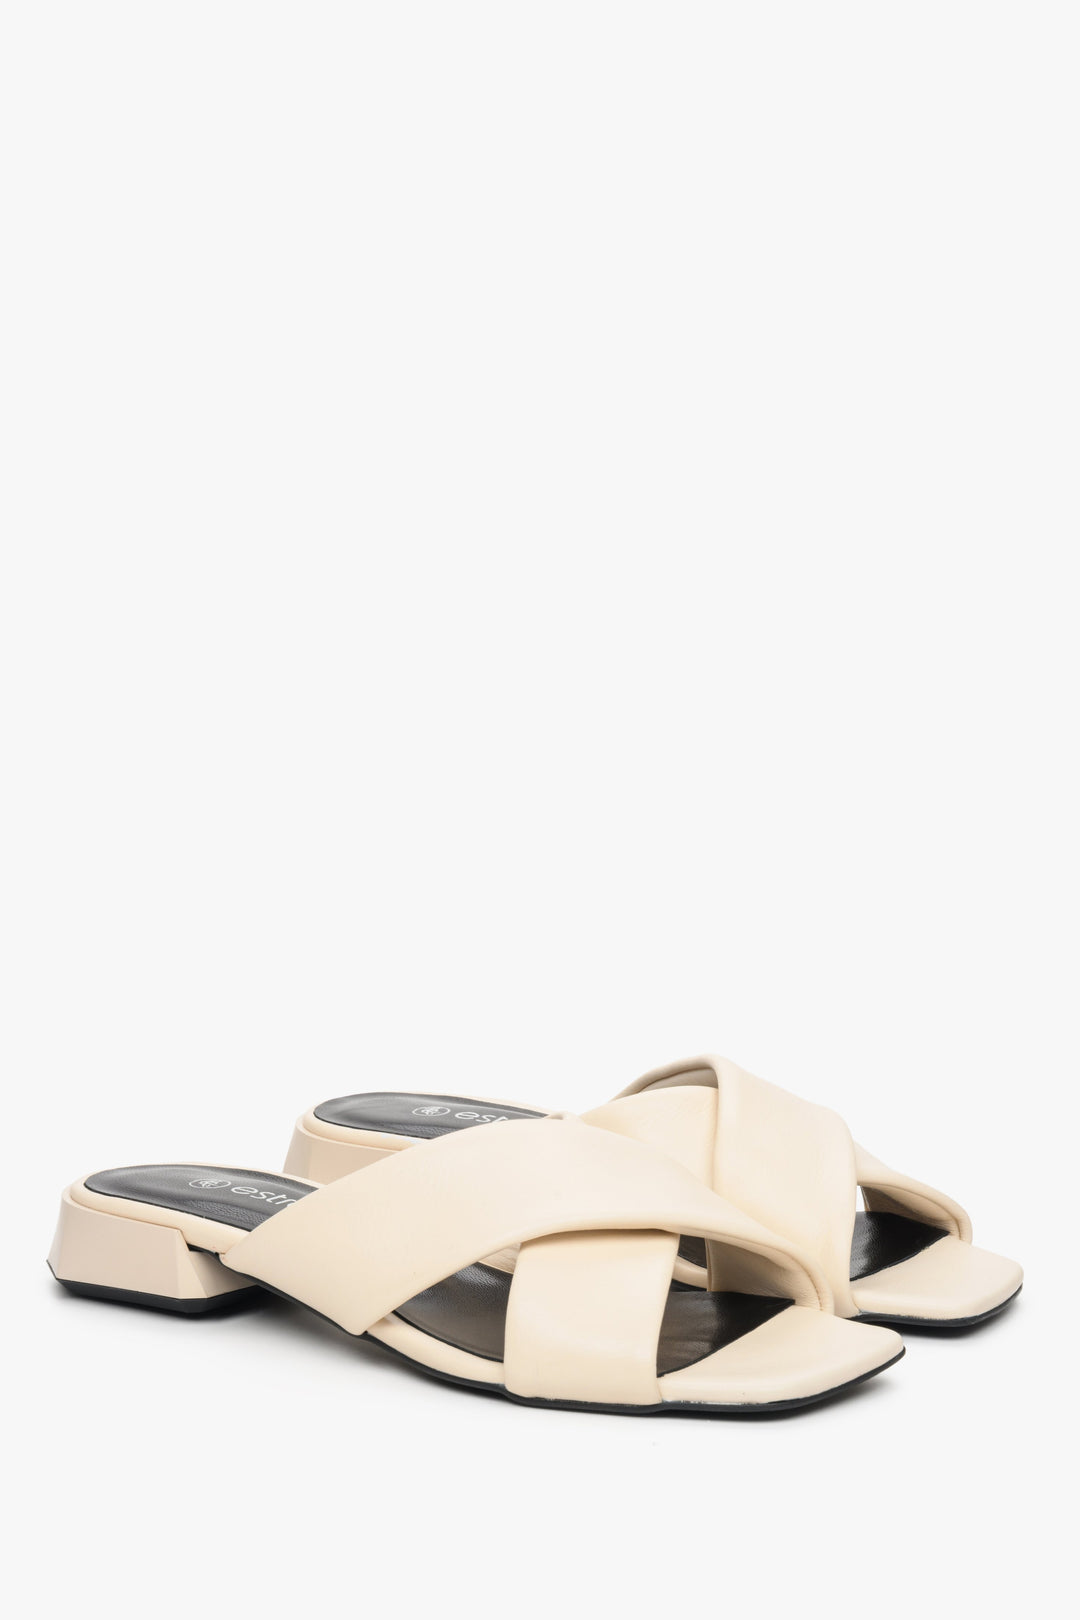 Women's Estro leather mules for summer with cross-straps on a low heel, beige colour.